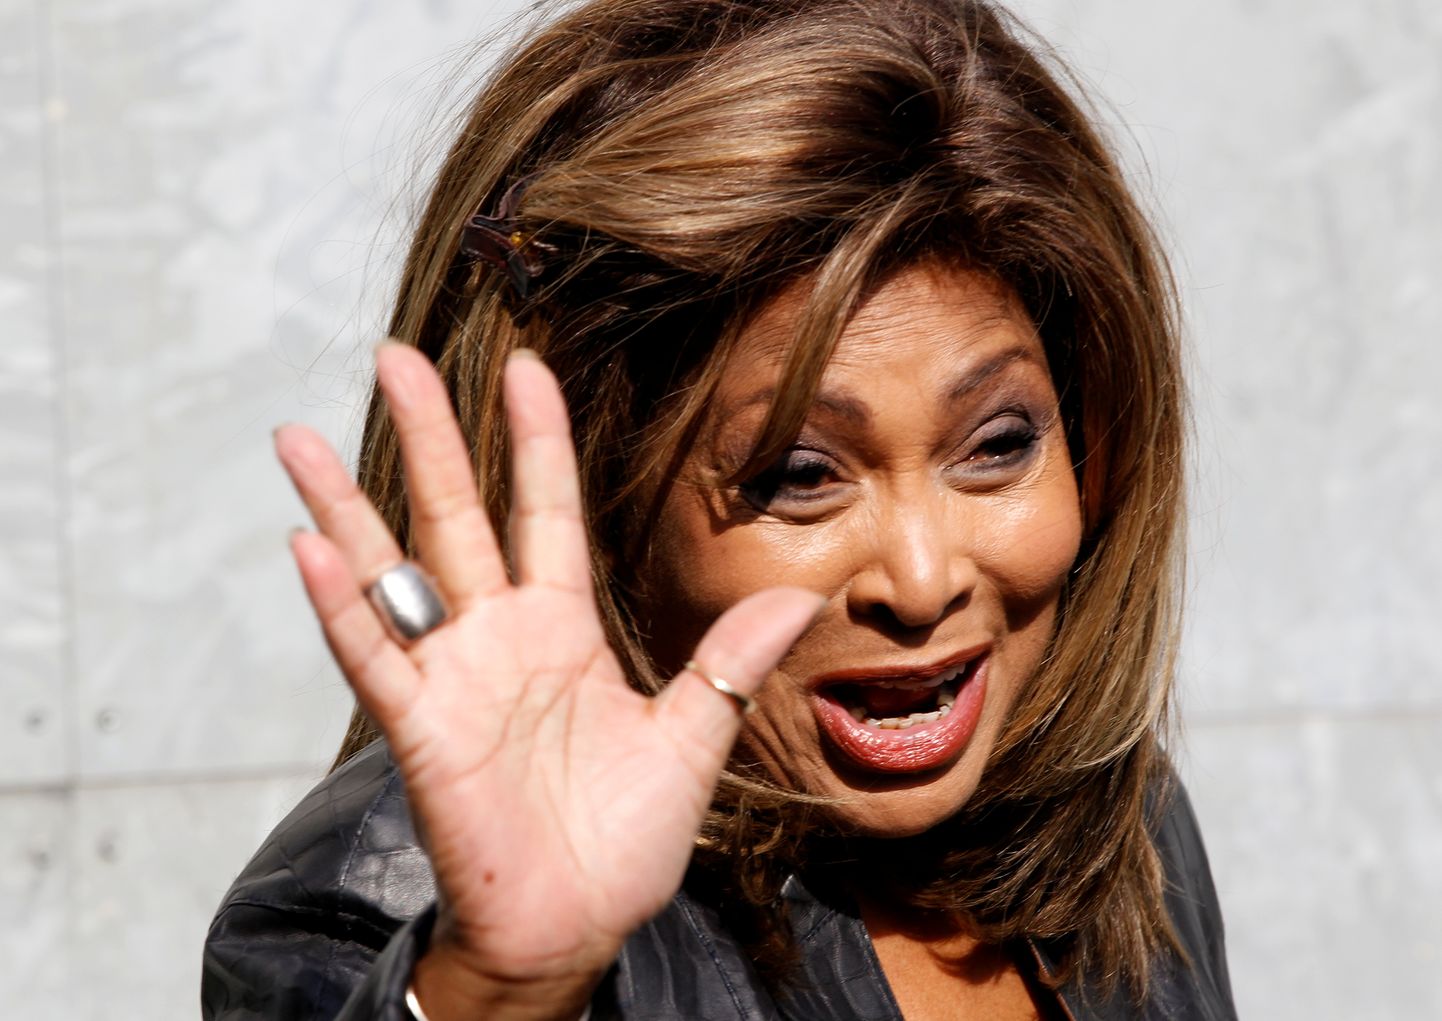 FILE PHOTO: U.S. singer Tina Turner waves during a photocall before the Emporio Armani Autumn/Winter 2011 women's collection show at Milan Fashion Week February 26, 2011.  REUTERS/Stefano Rellandini/File Photo